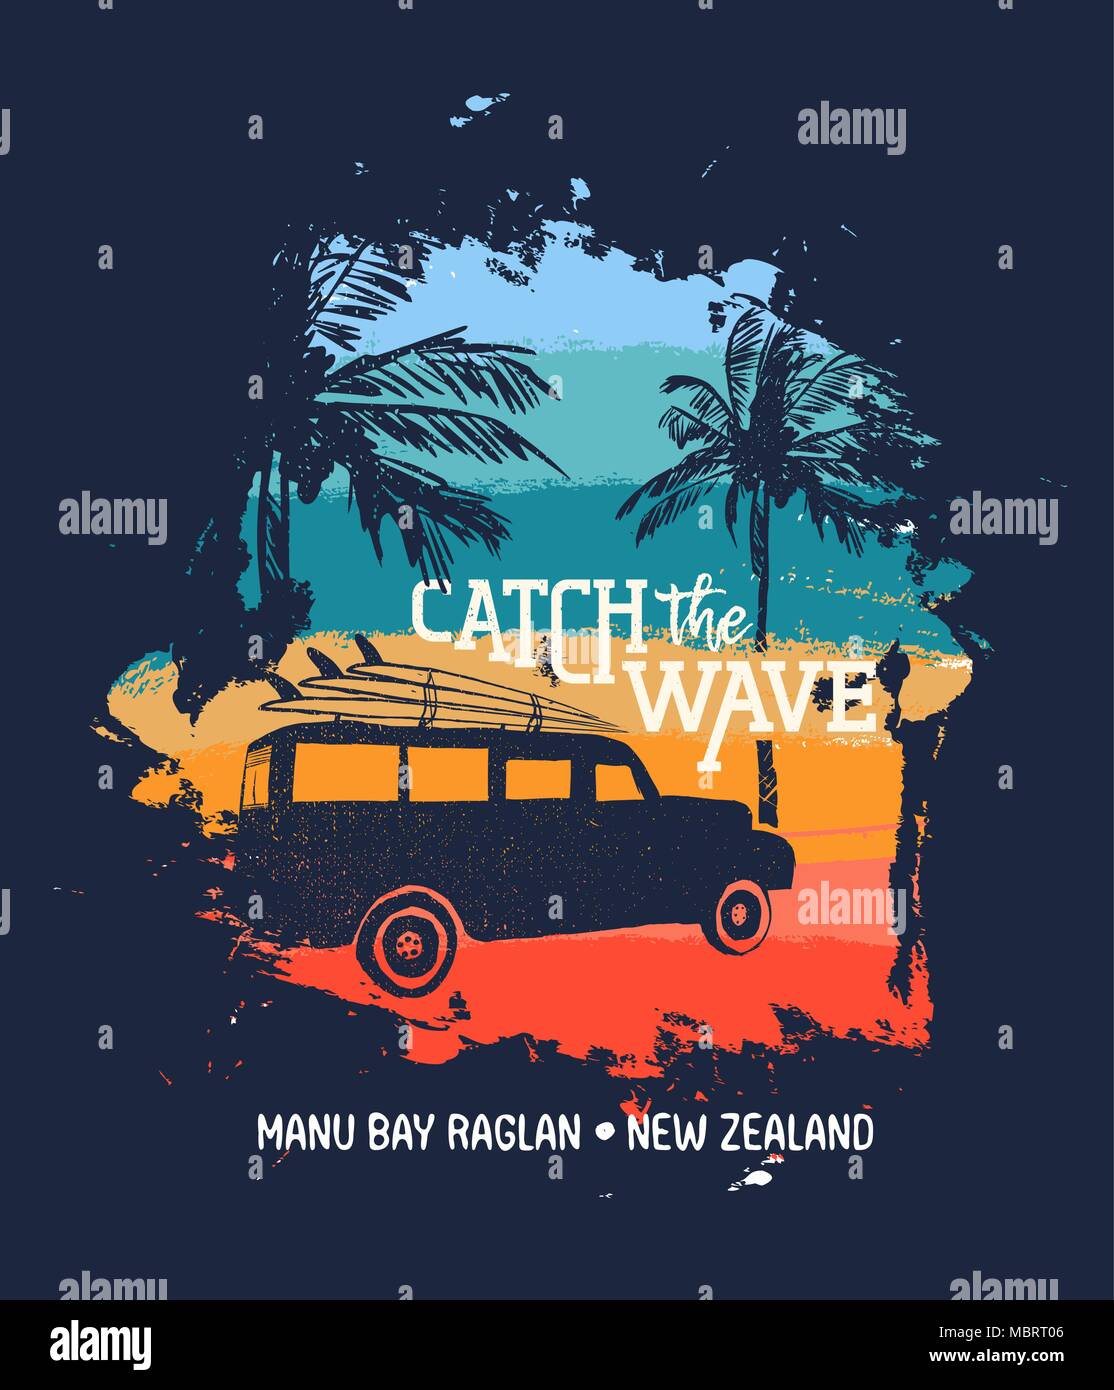 Summer vacation in Manu Bay Raglan, New Zealand. Holiday illustration with text quote, car and surf boards on tropical beach. Vintage texture design f Stock Vector